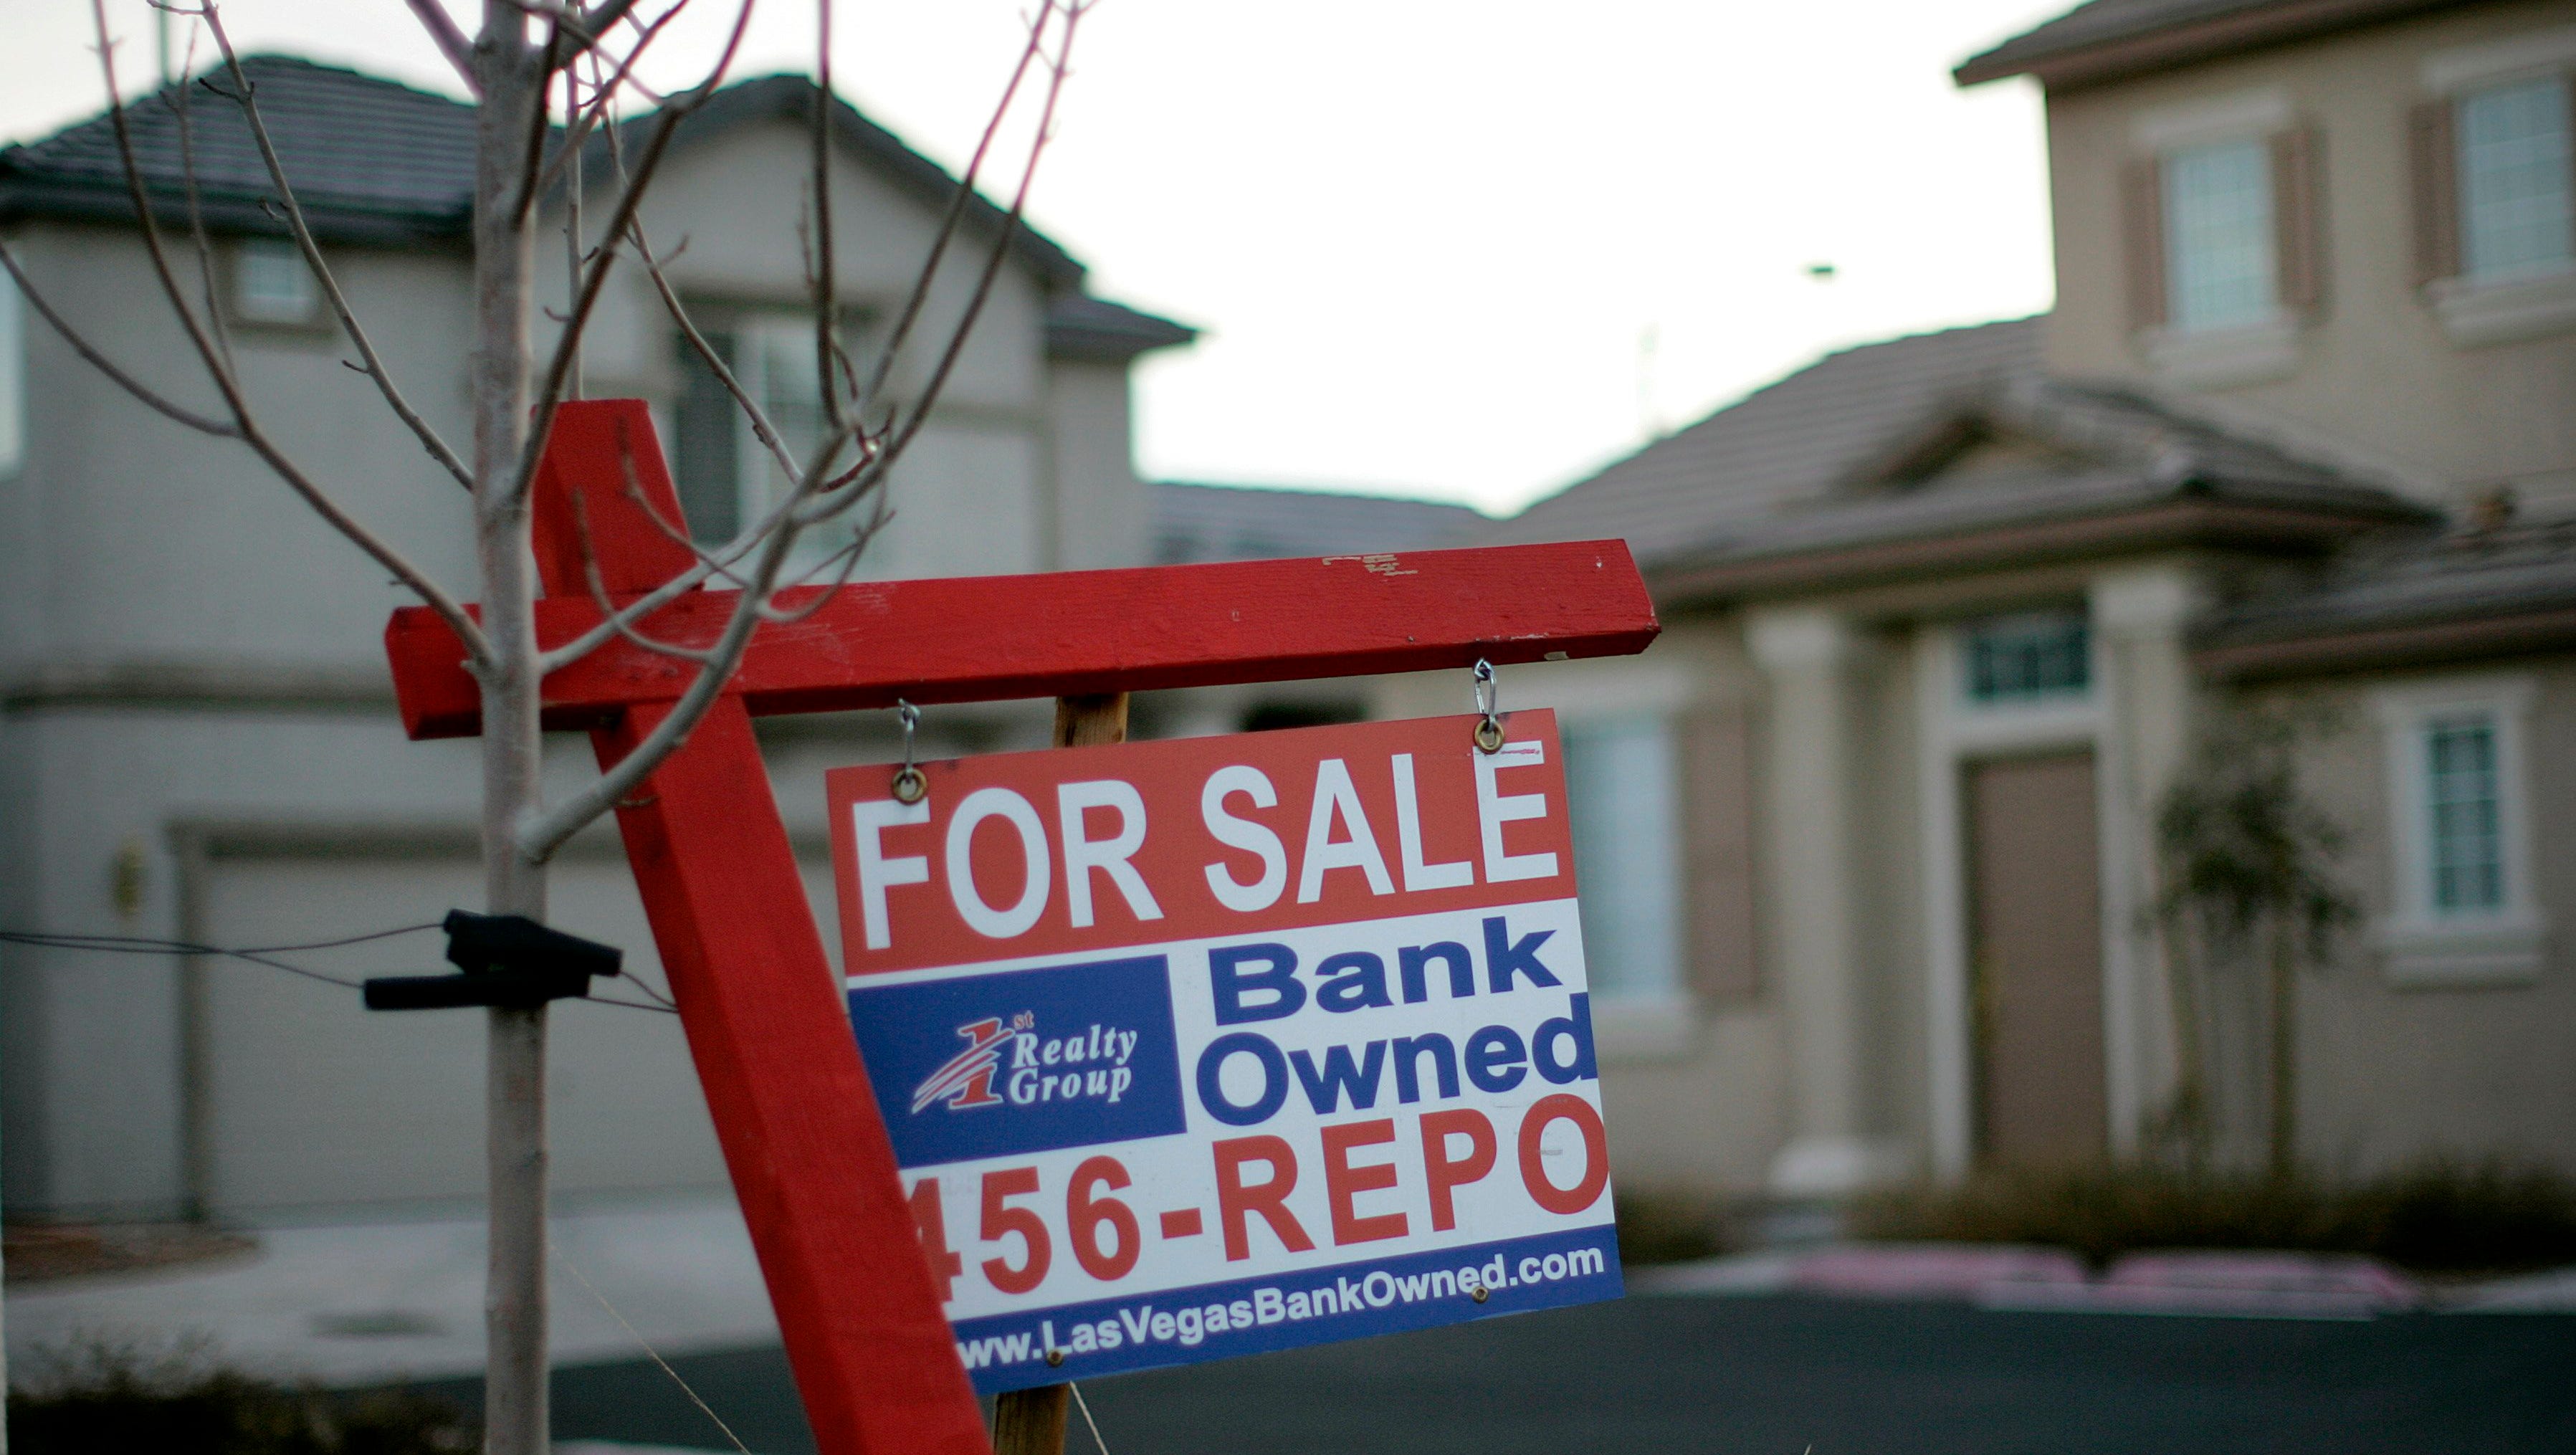 When banks could restart home foreclosure proceedings